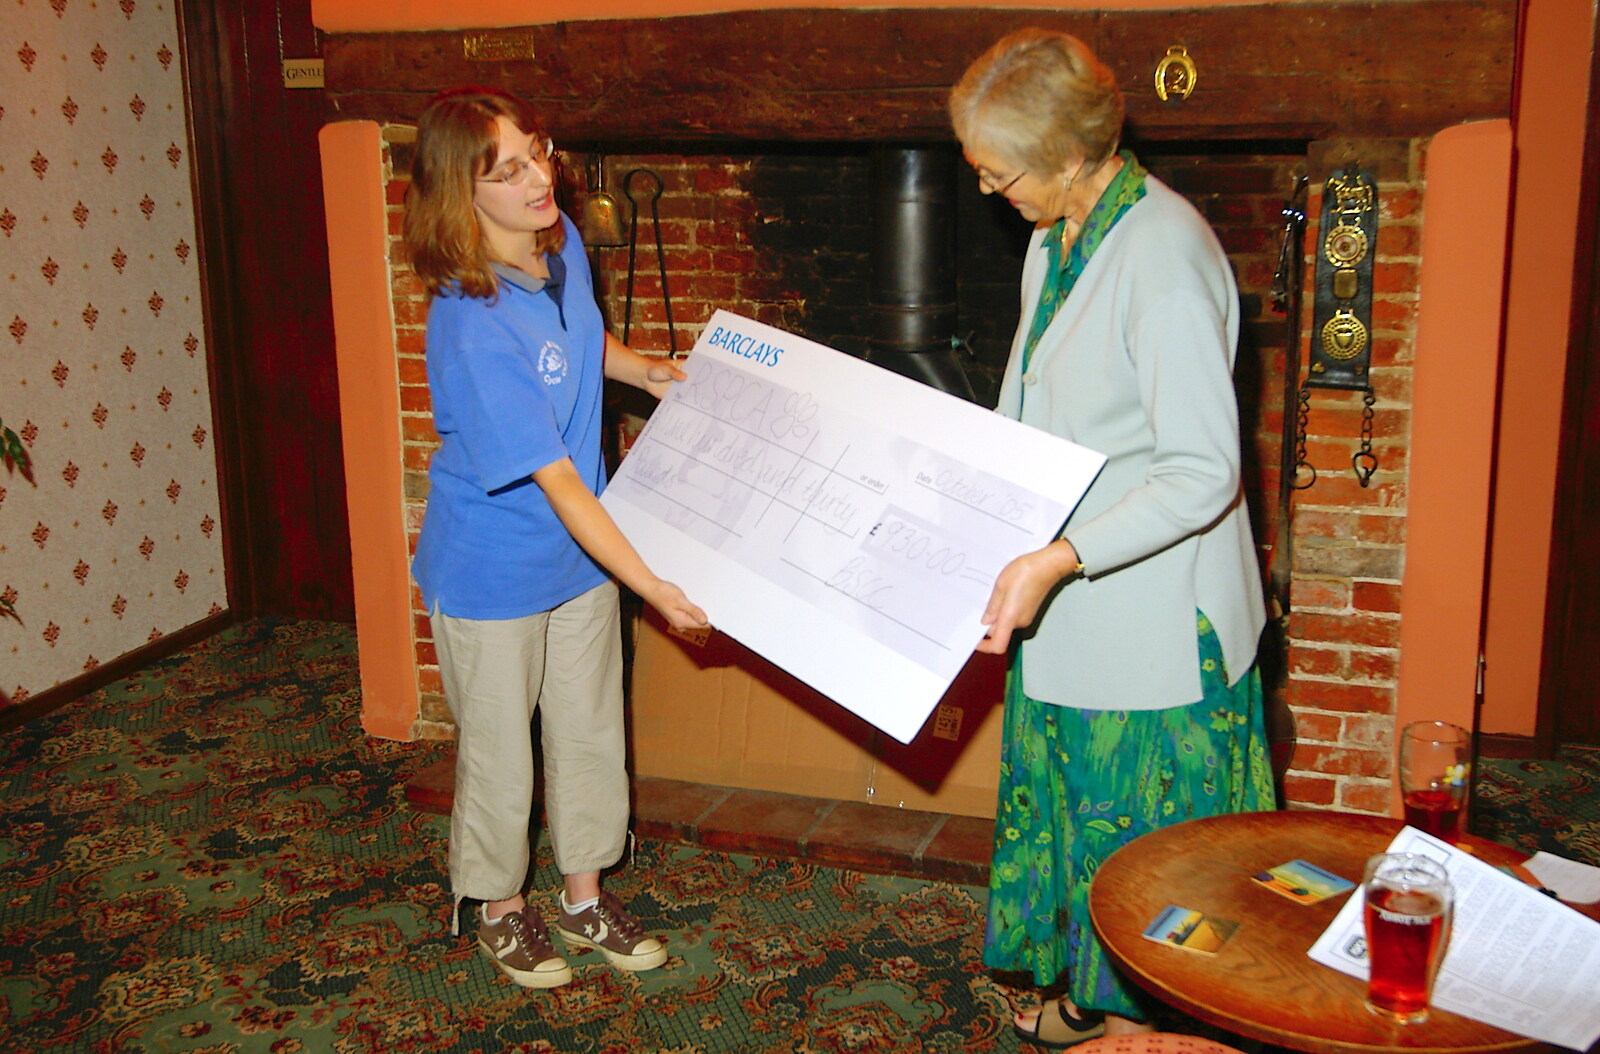 The BSCC Presentation and a Murder Mystery, Brome and Gislingham, Suffolk- 6th October 2005: Sue hands the over-sized novelty cheque over